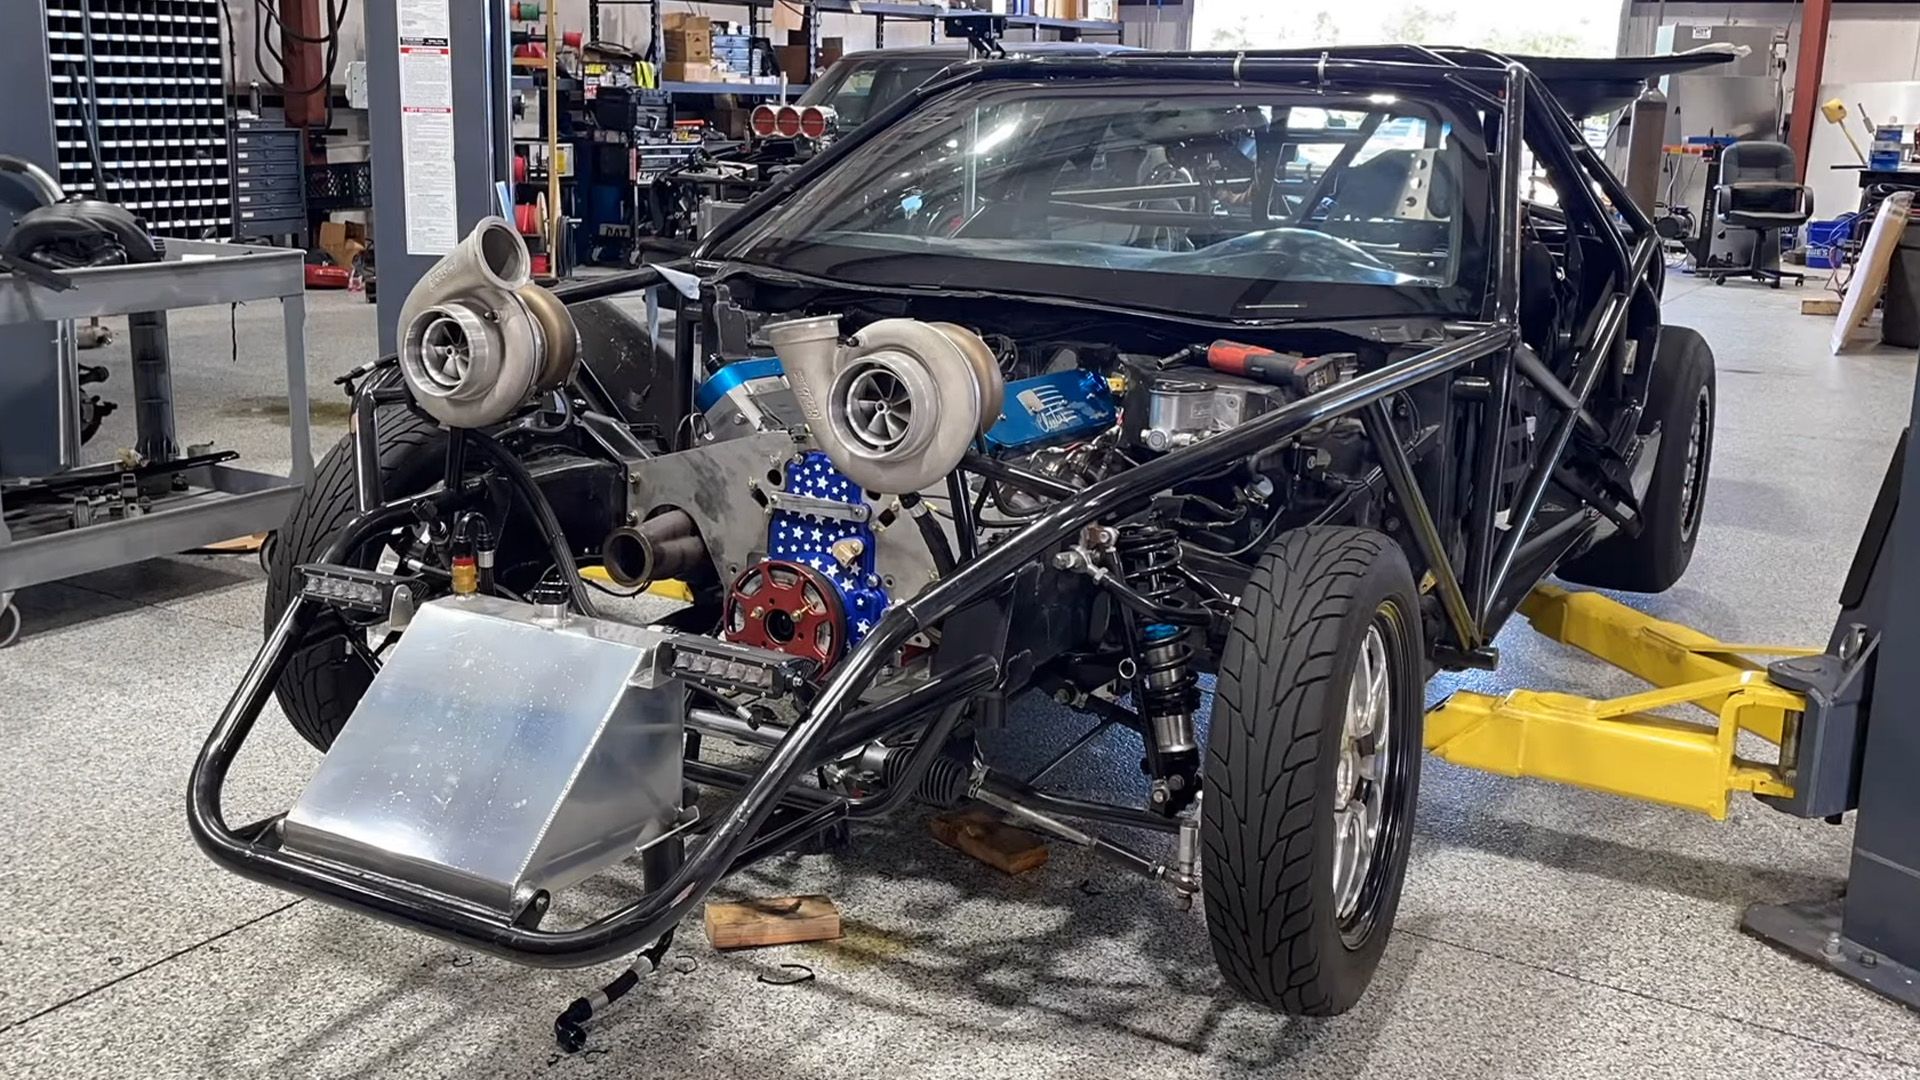 Insane Cleetus McFarland's Leroy 2.0 Drag Car Cranking Out 1,000 HP With New Motor